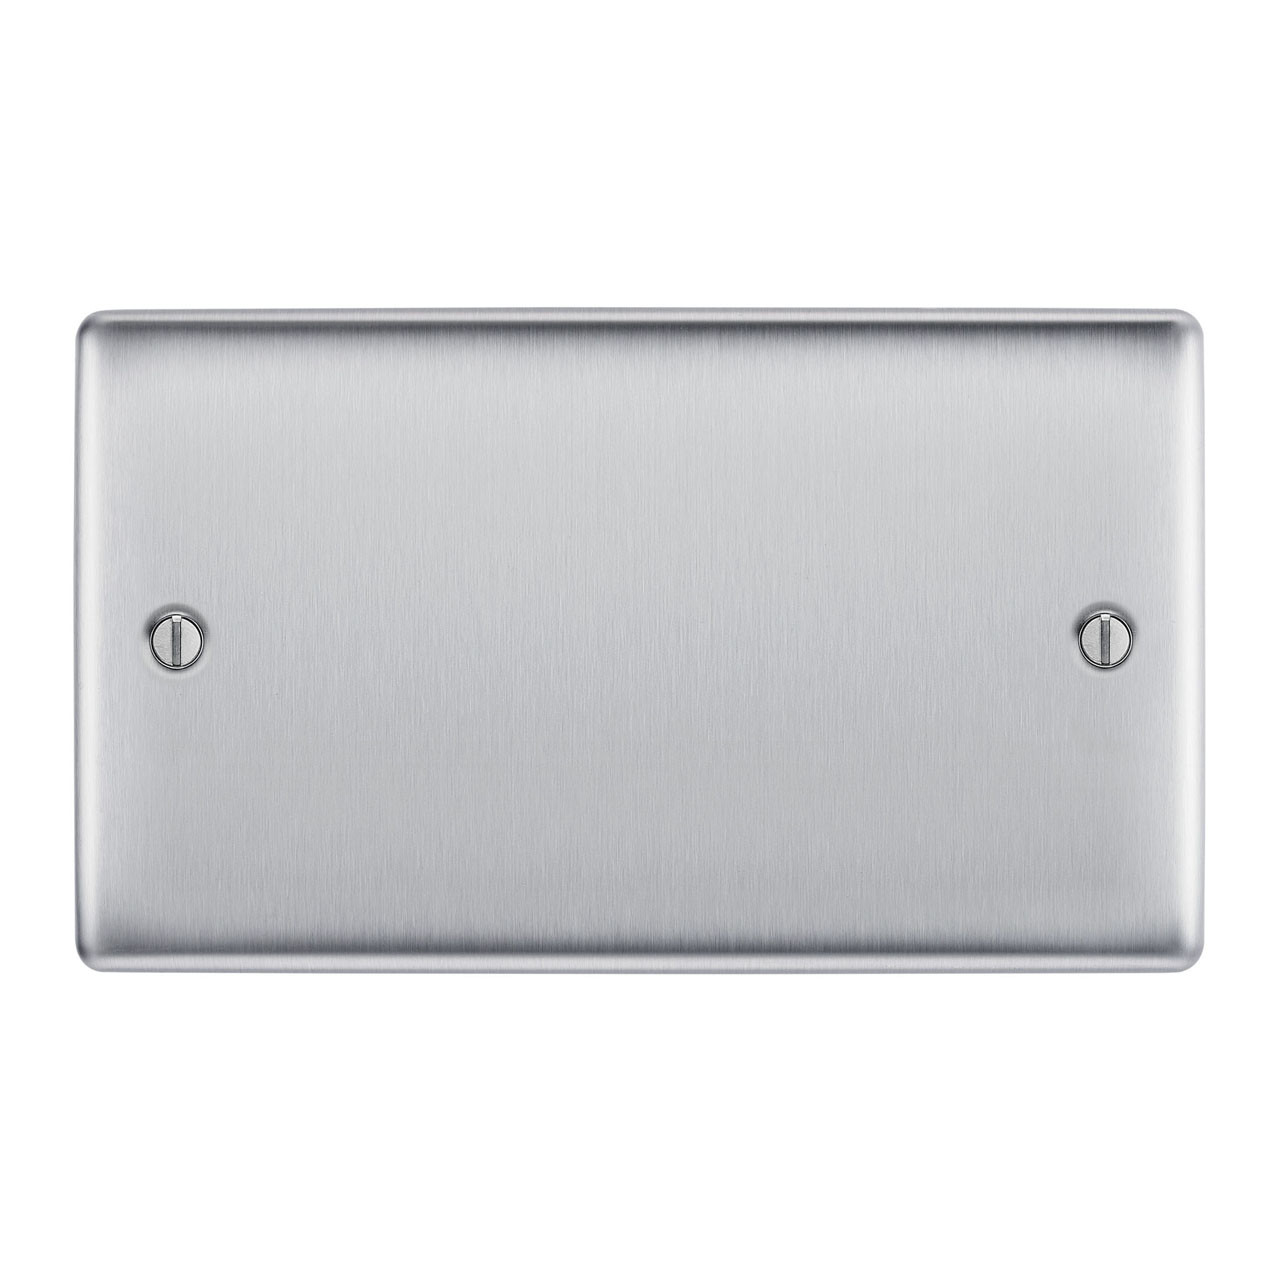 Photograph of BG Electrical Brushed Steel 2 Gang Double Blank Plate